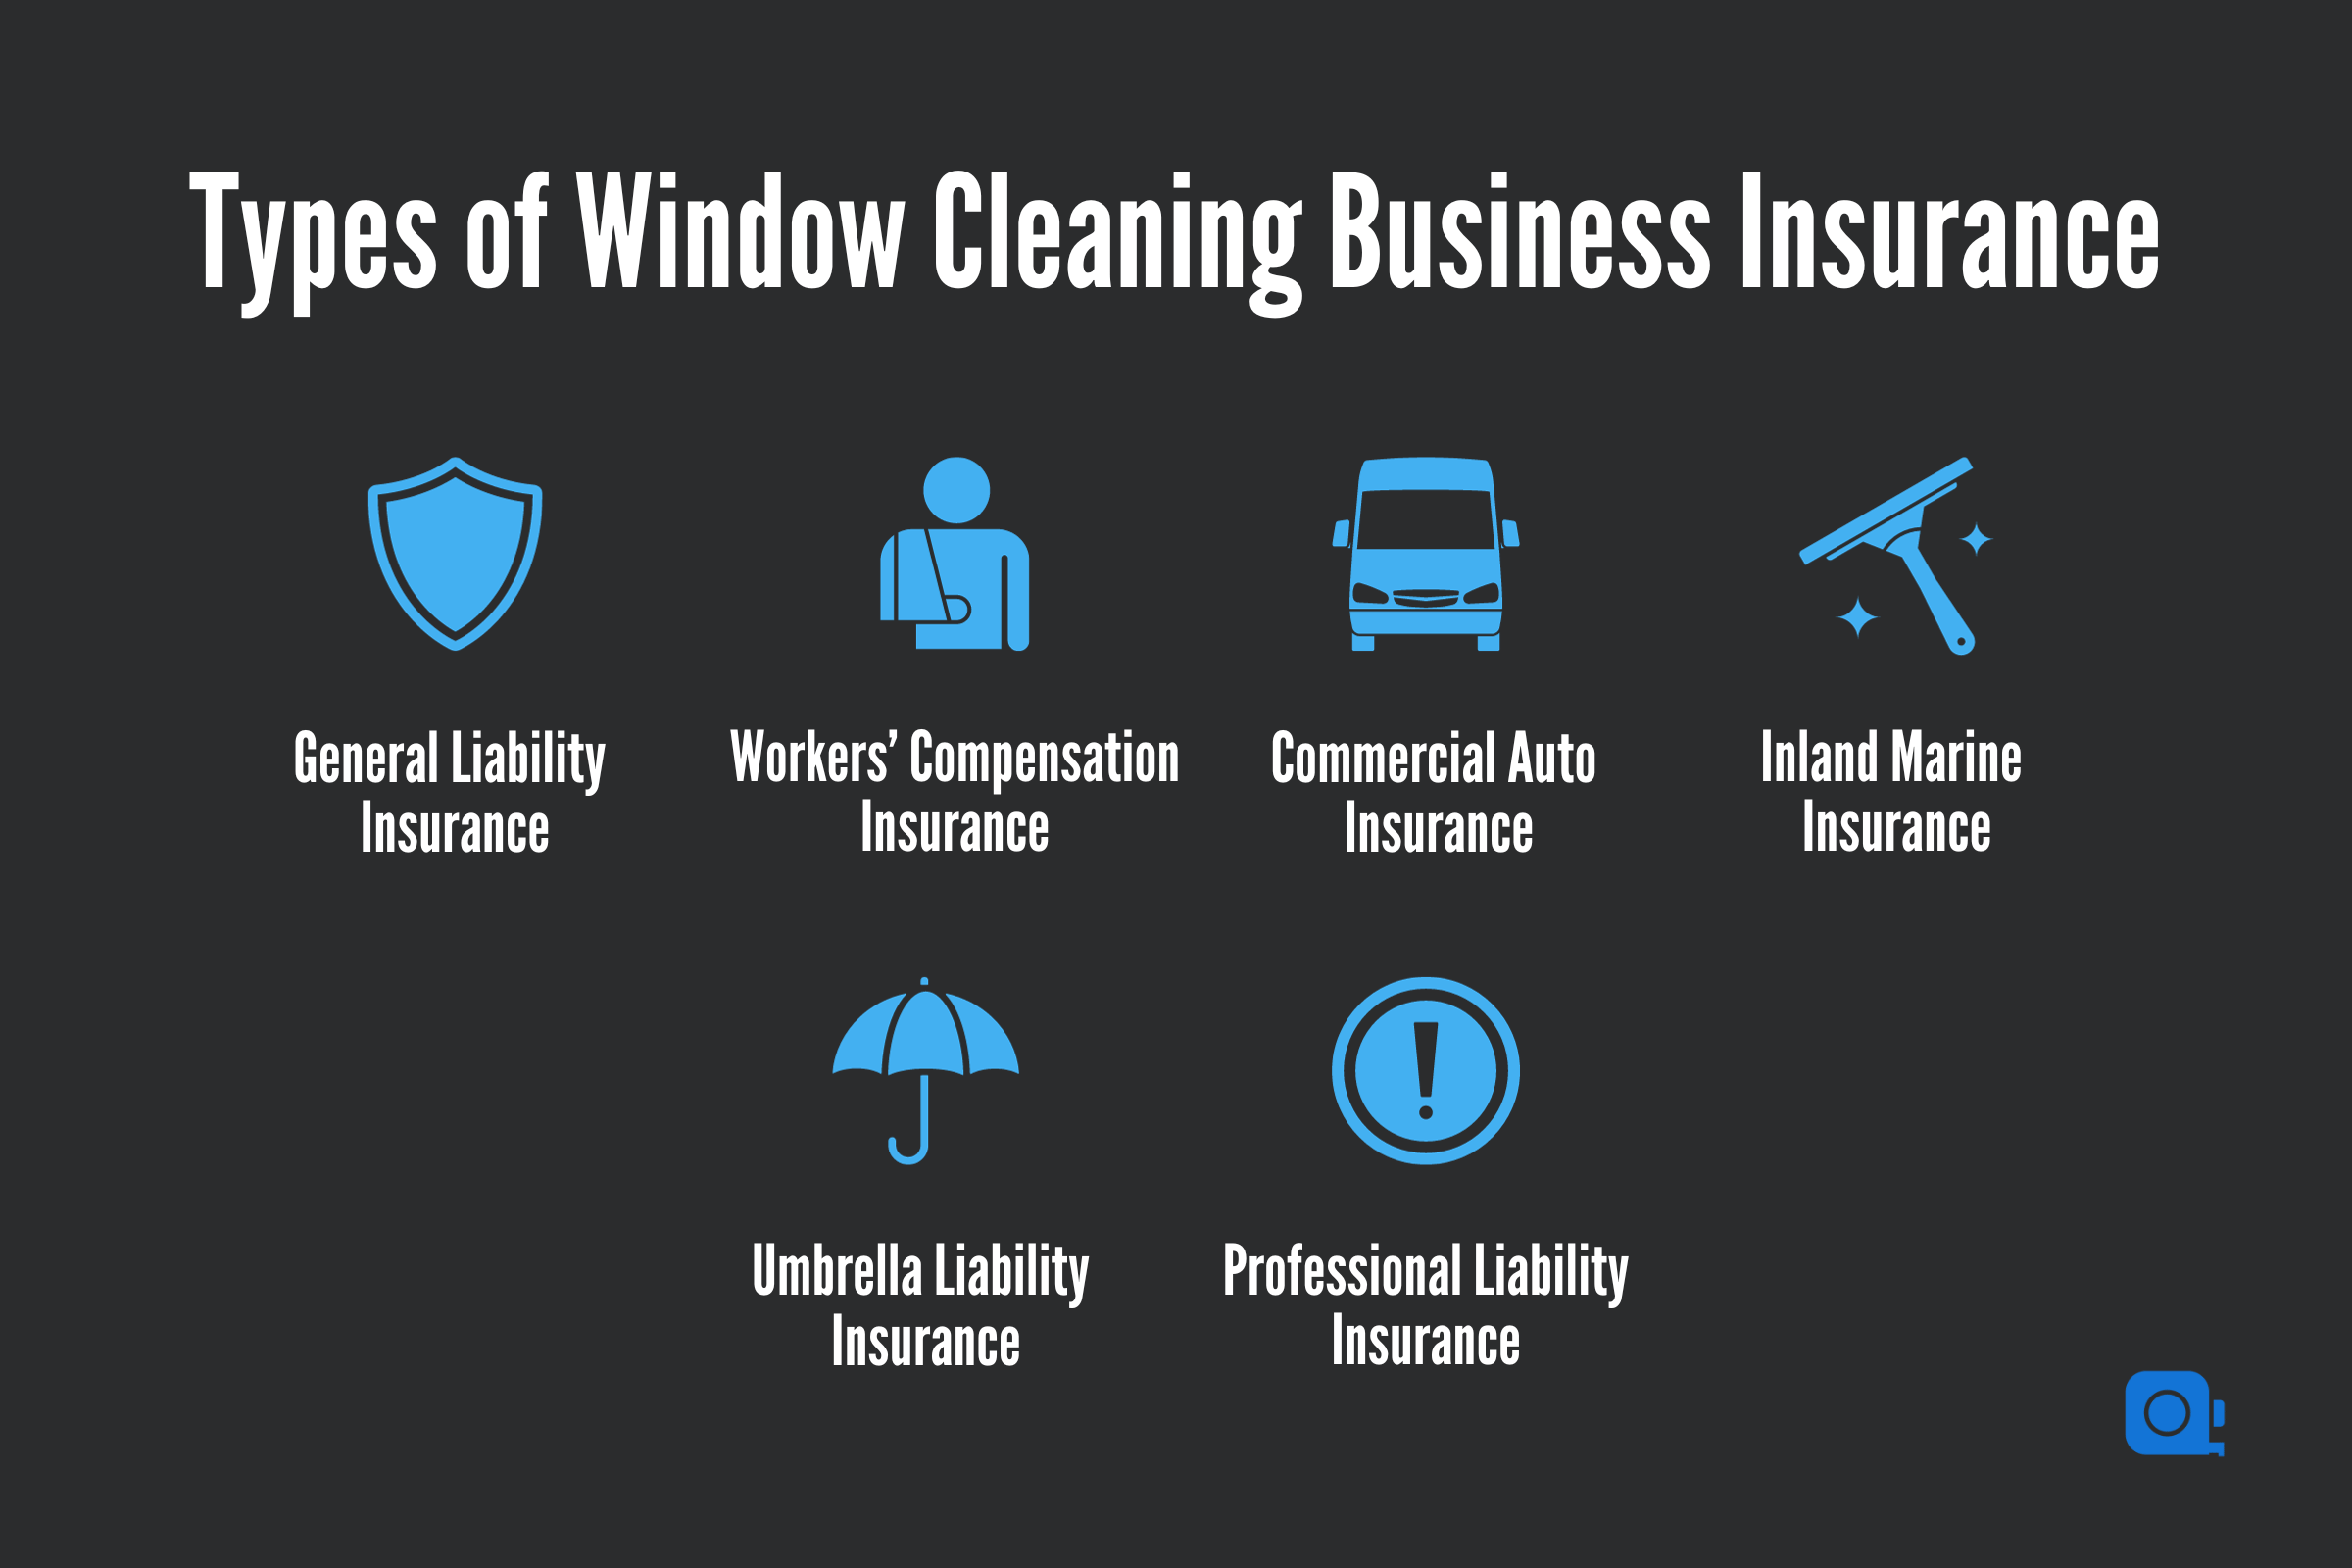 Types of Window Cleaning Business Insurance